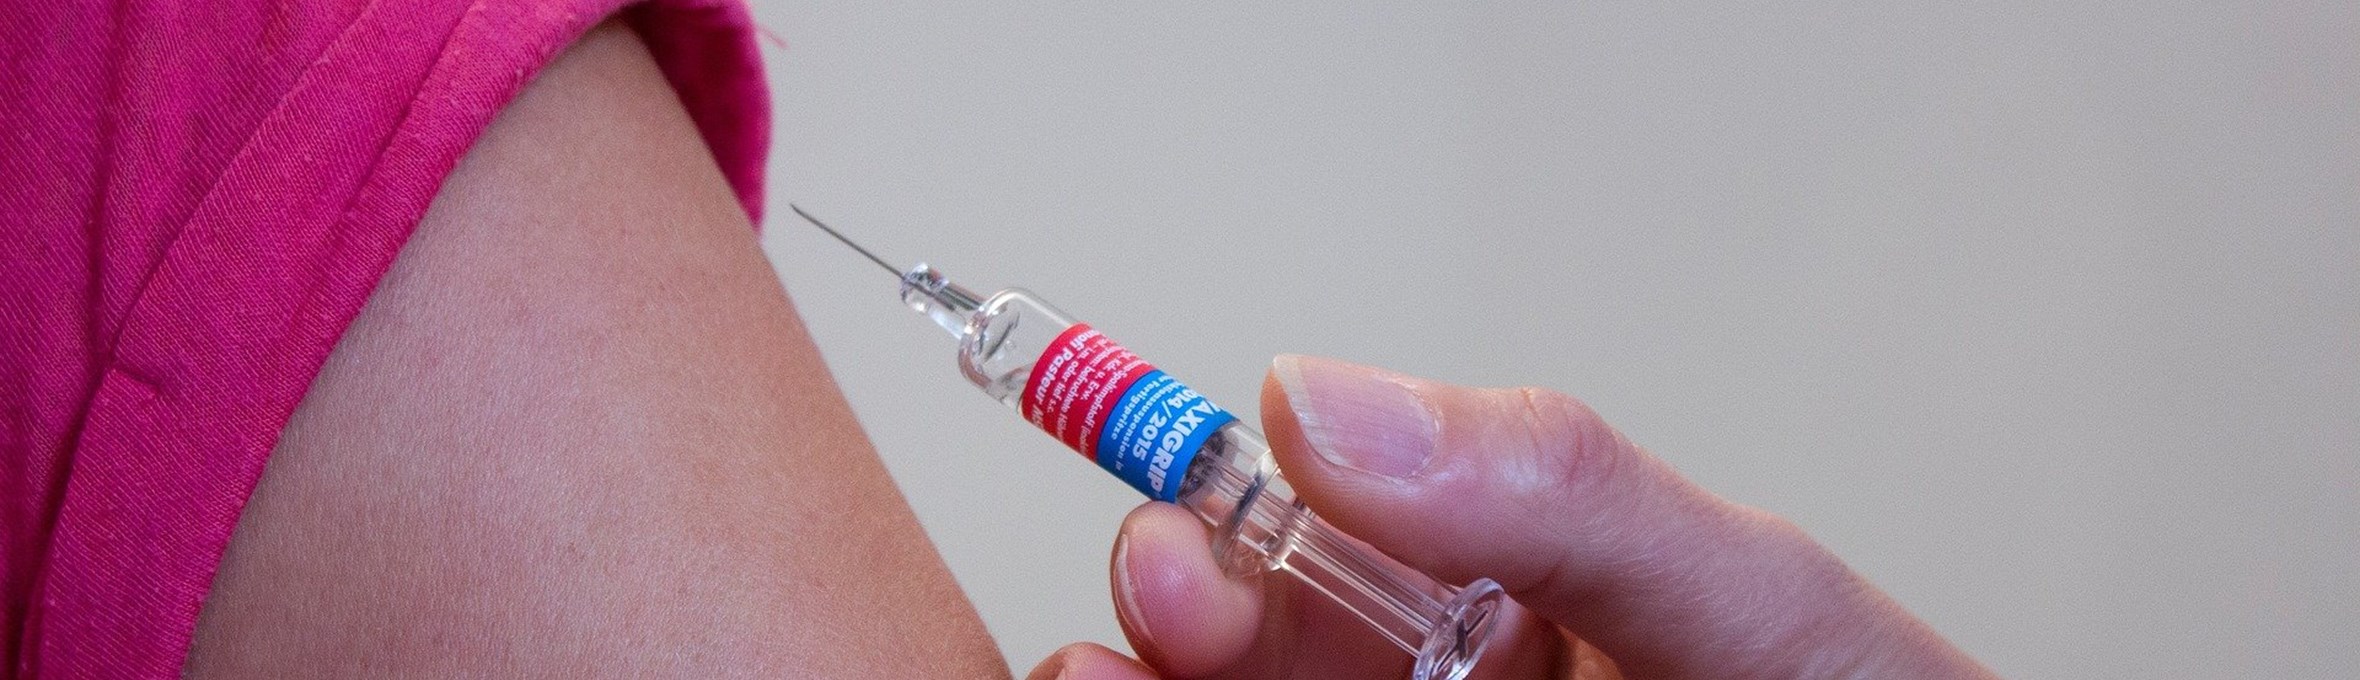 Person receiving a vaccination in their arm